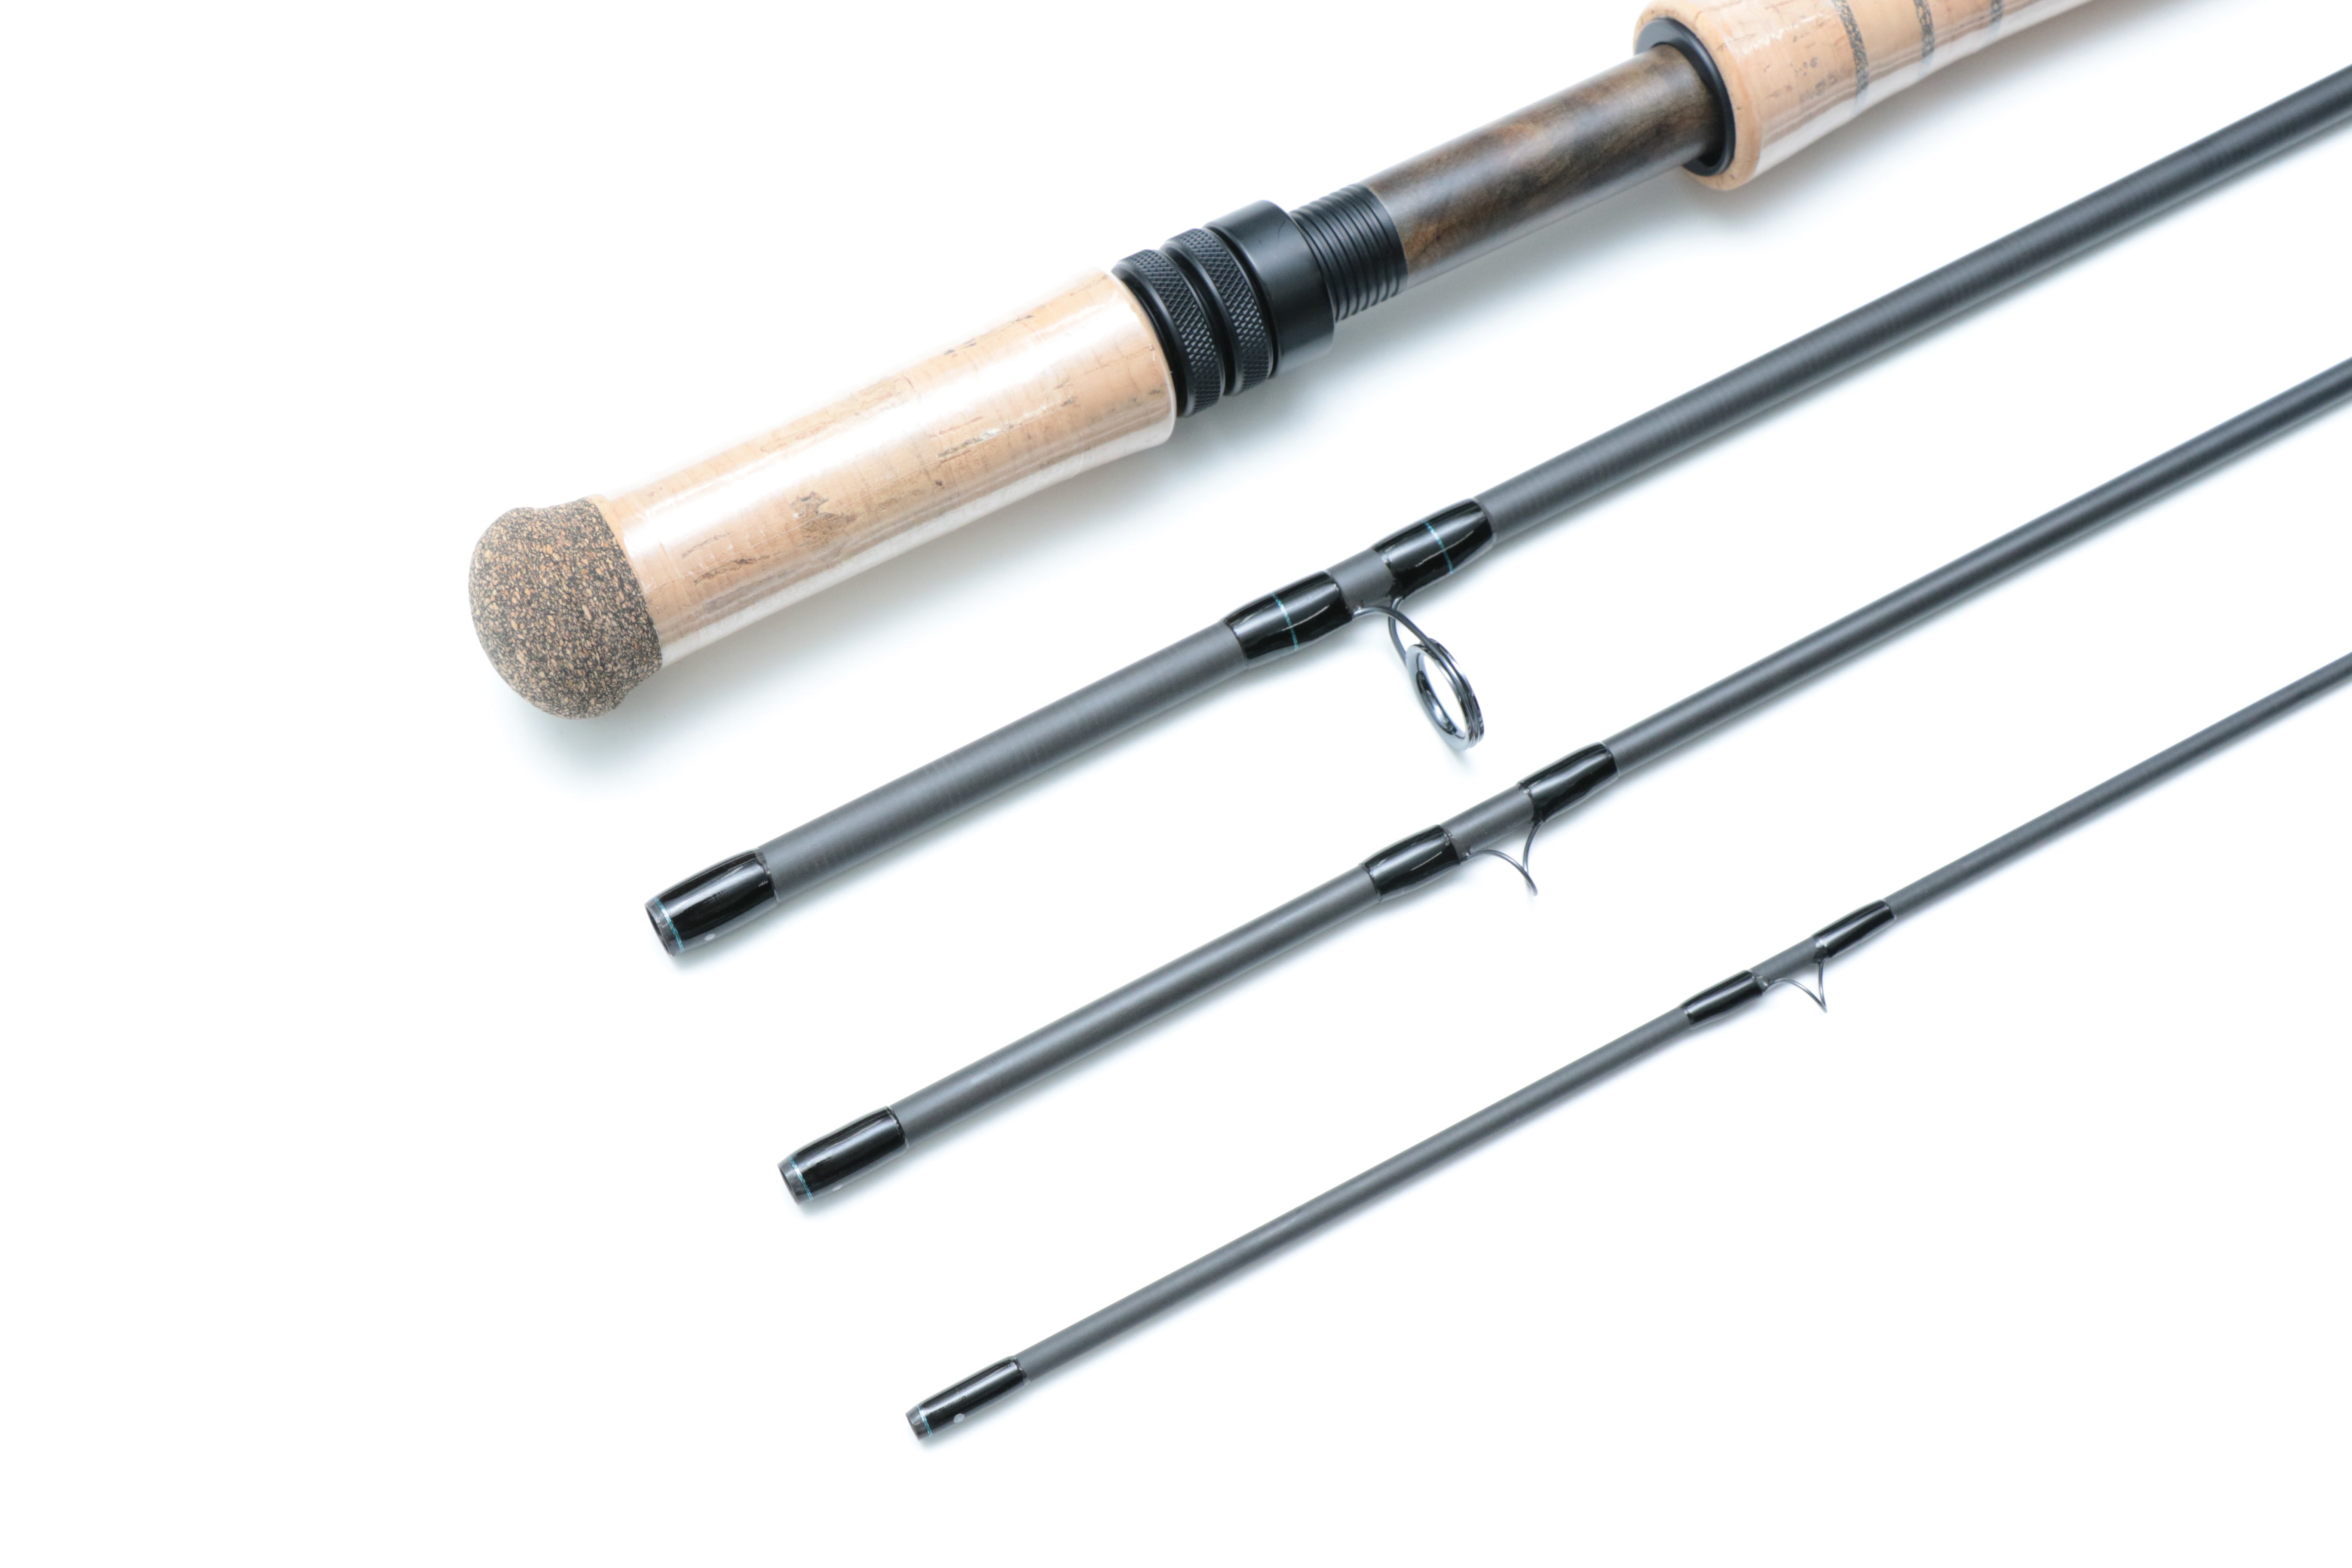 OPST Two-Handed Rods